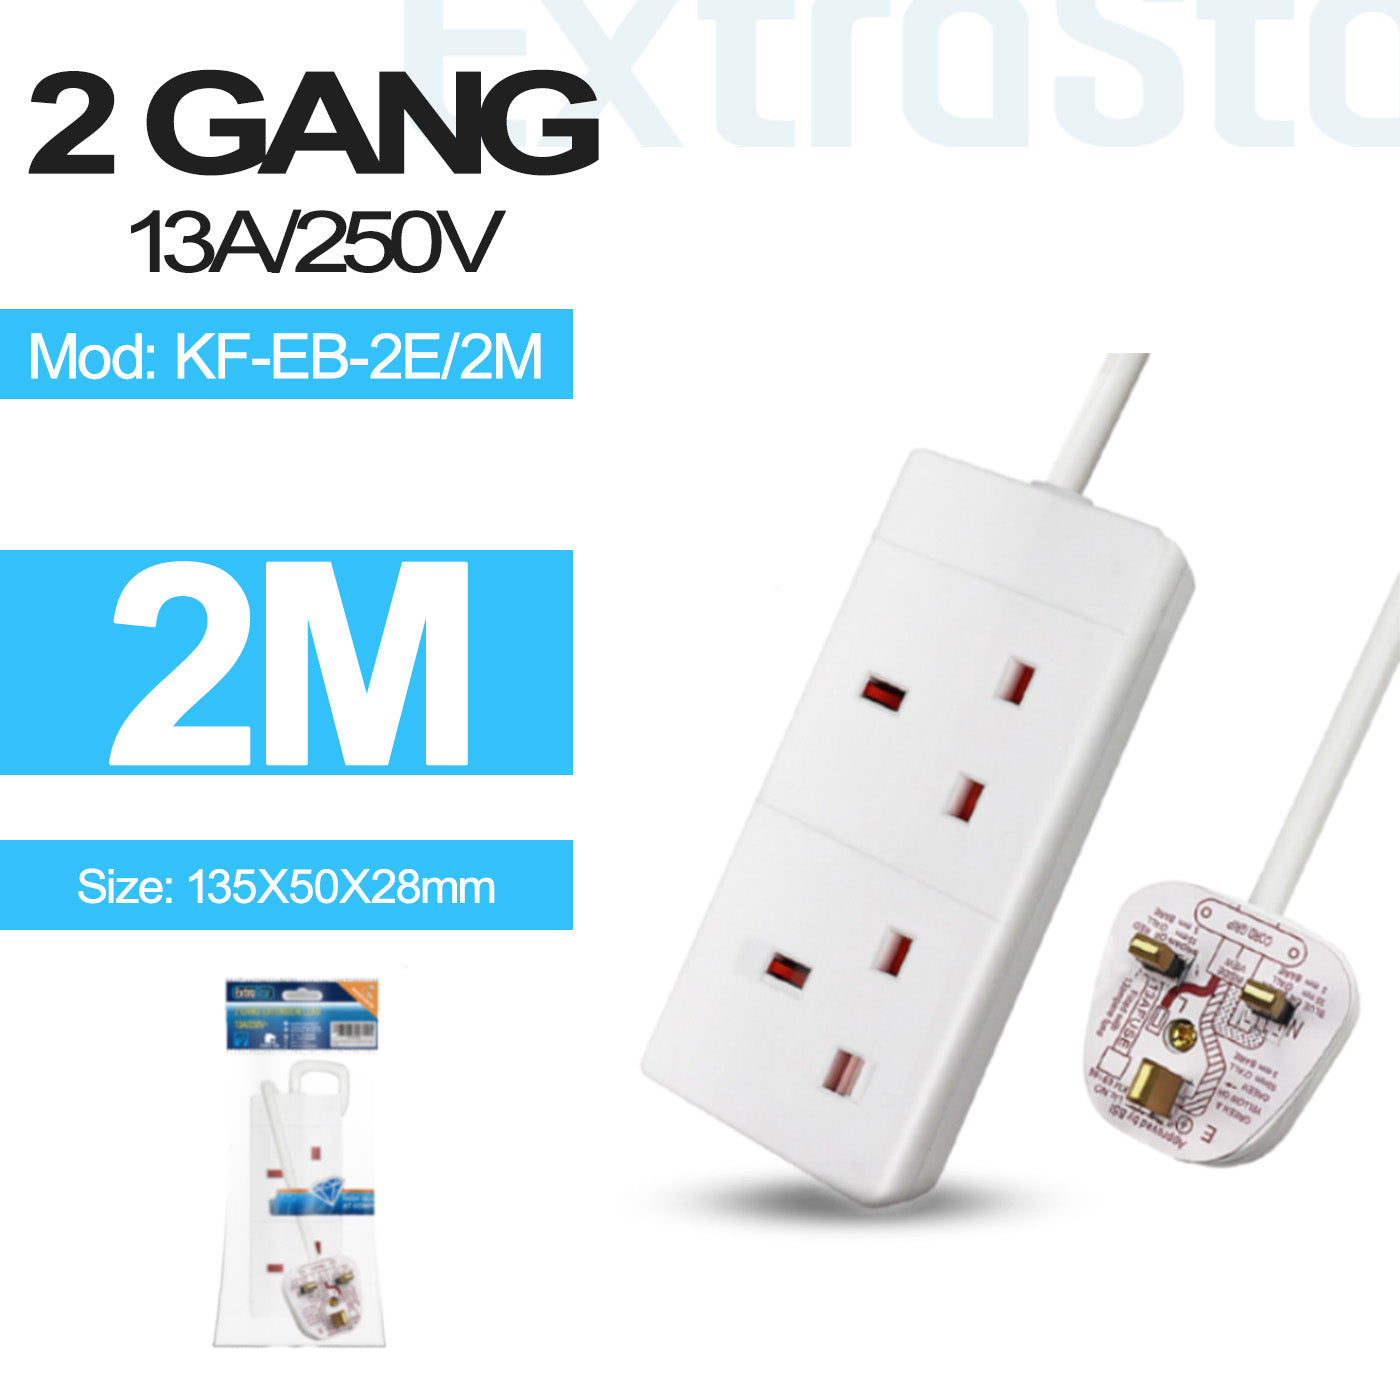 2 Gang Unswitched Extension Lead 2m (KF-EB-2E/2M)